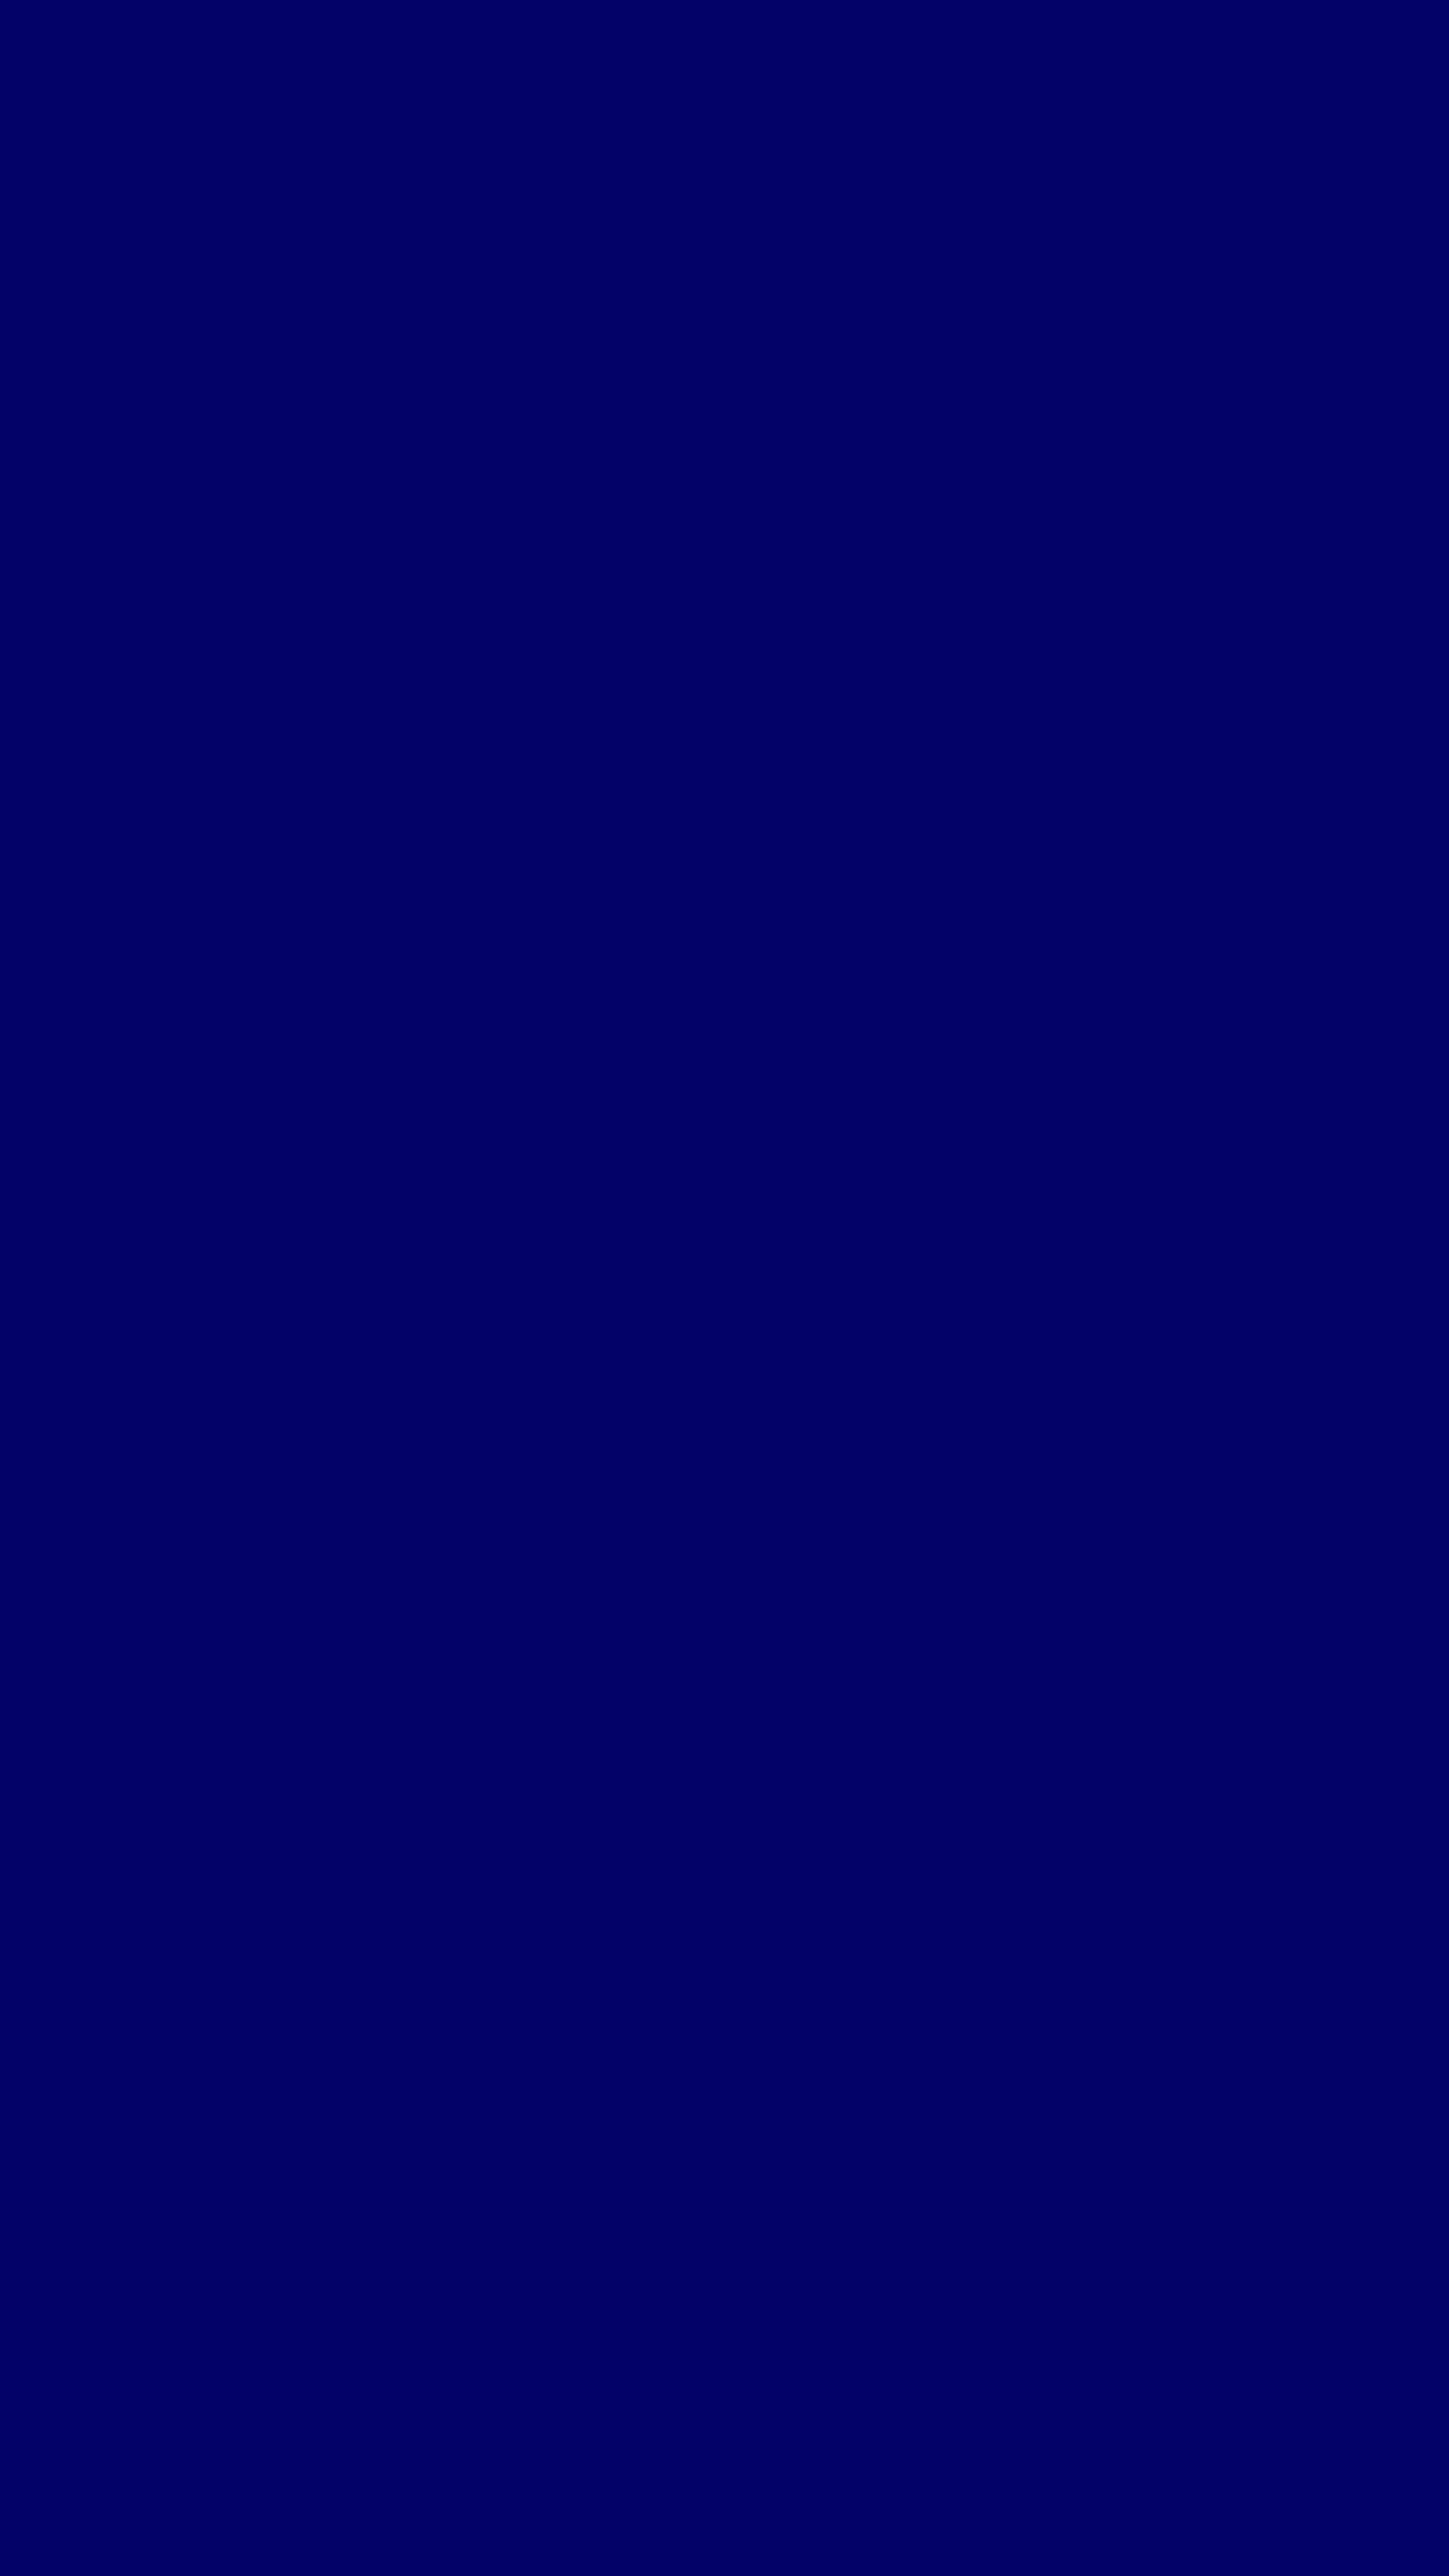 blue, color, background, texture, textures, saturated 1080p